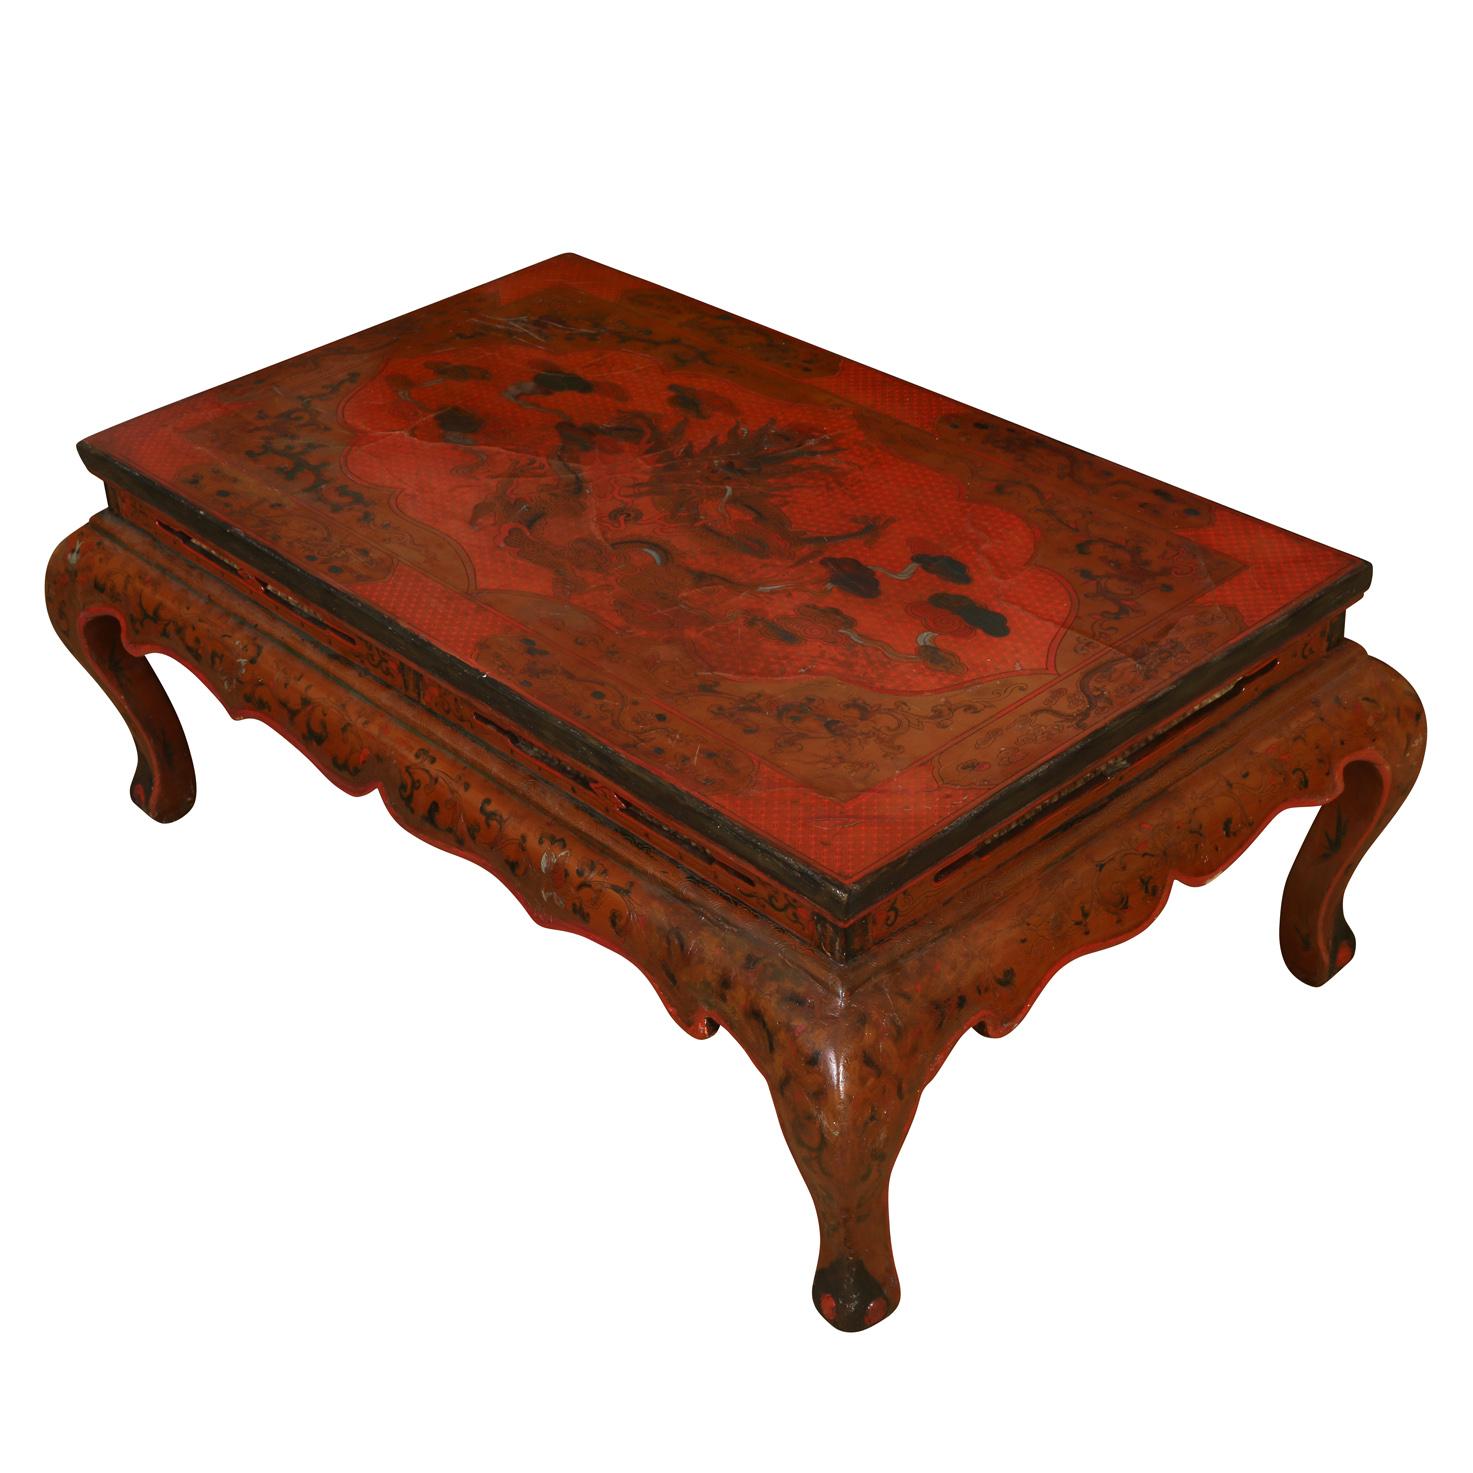 20th Century Chinese Red Dragon Motif Coromandel Lacquer Coffee Table For Sale